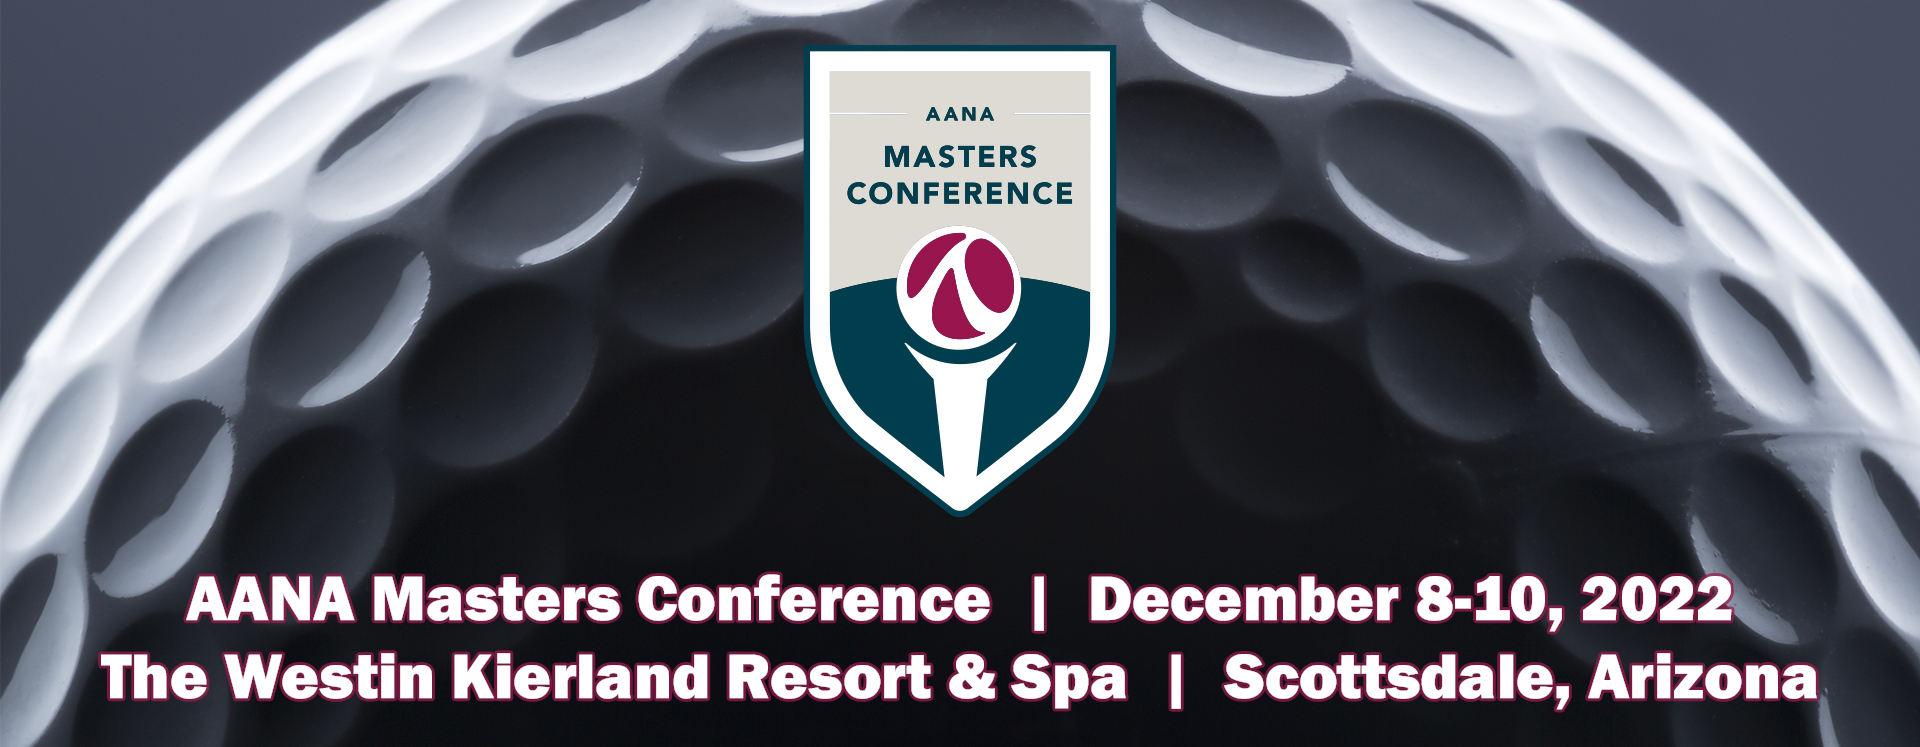 Masters Conference